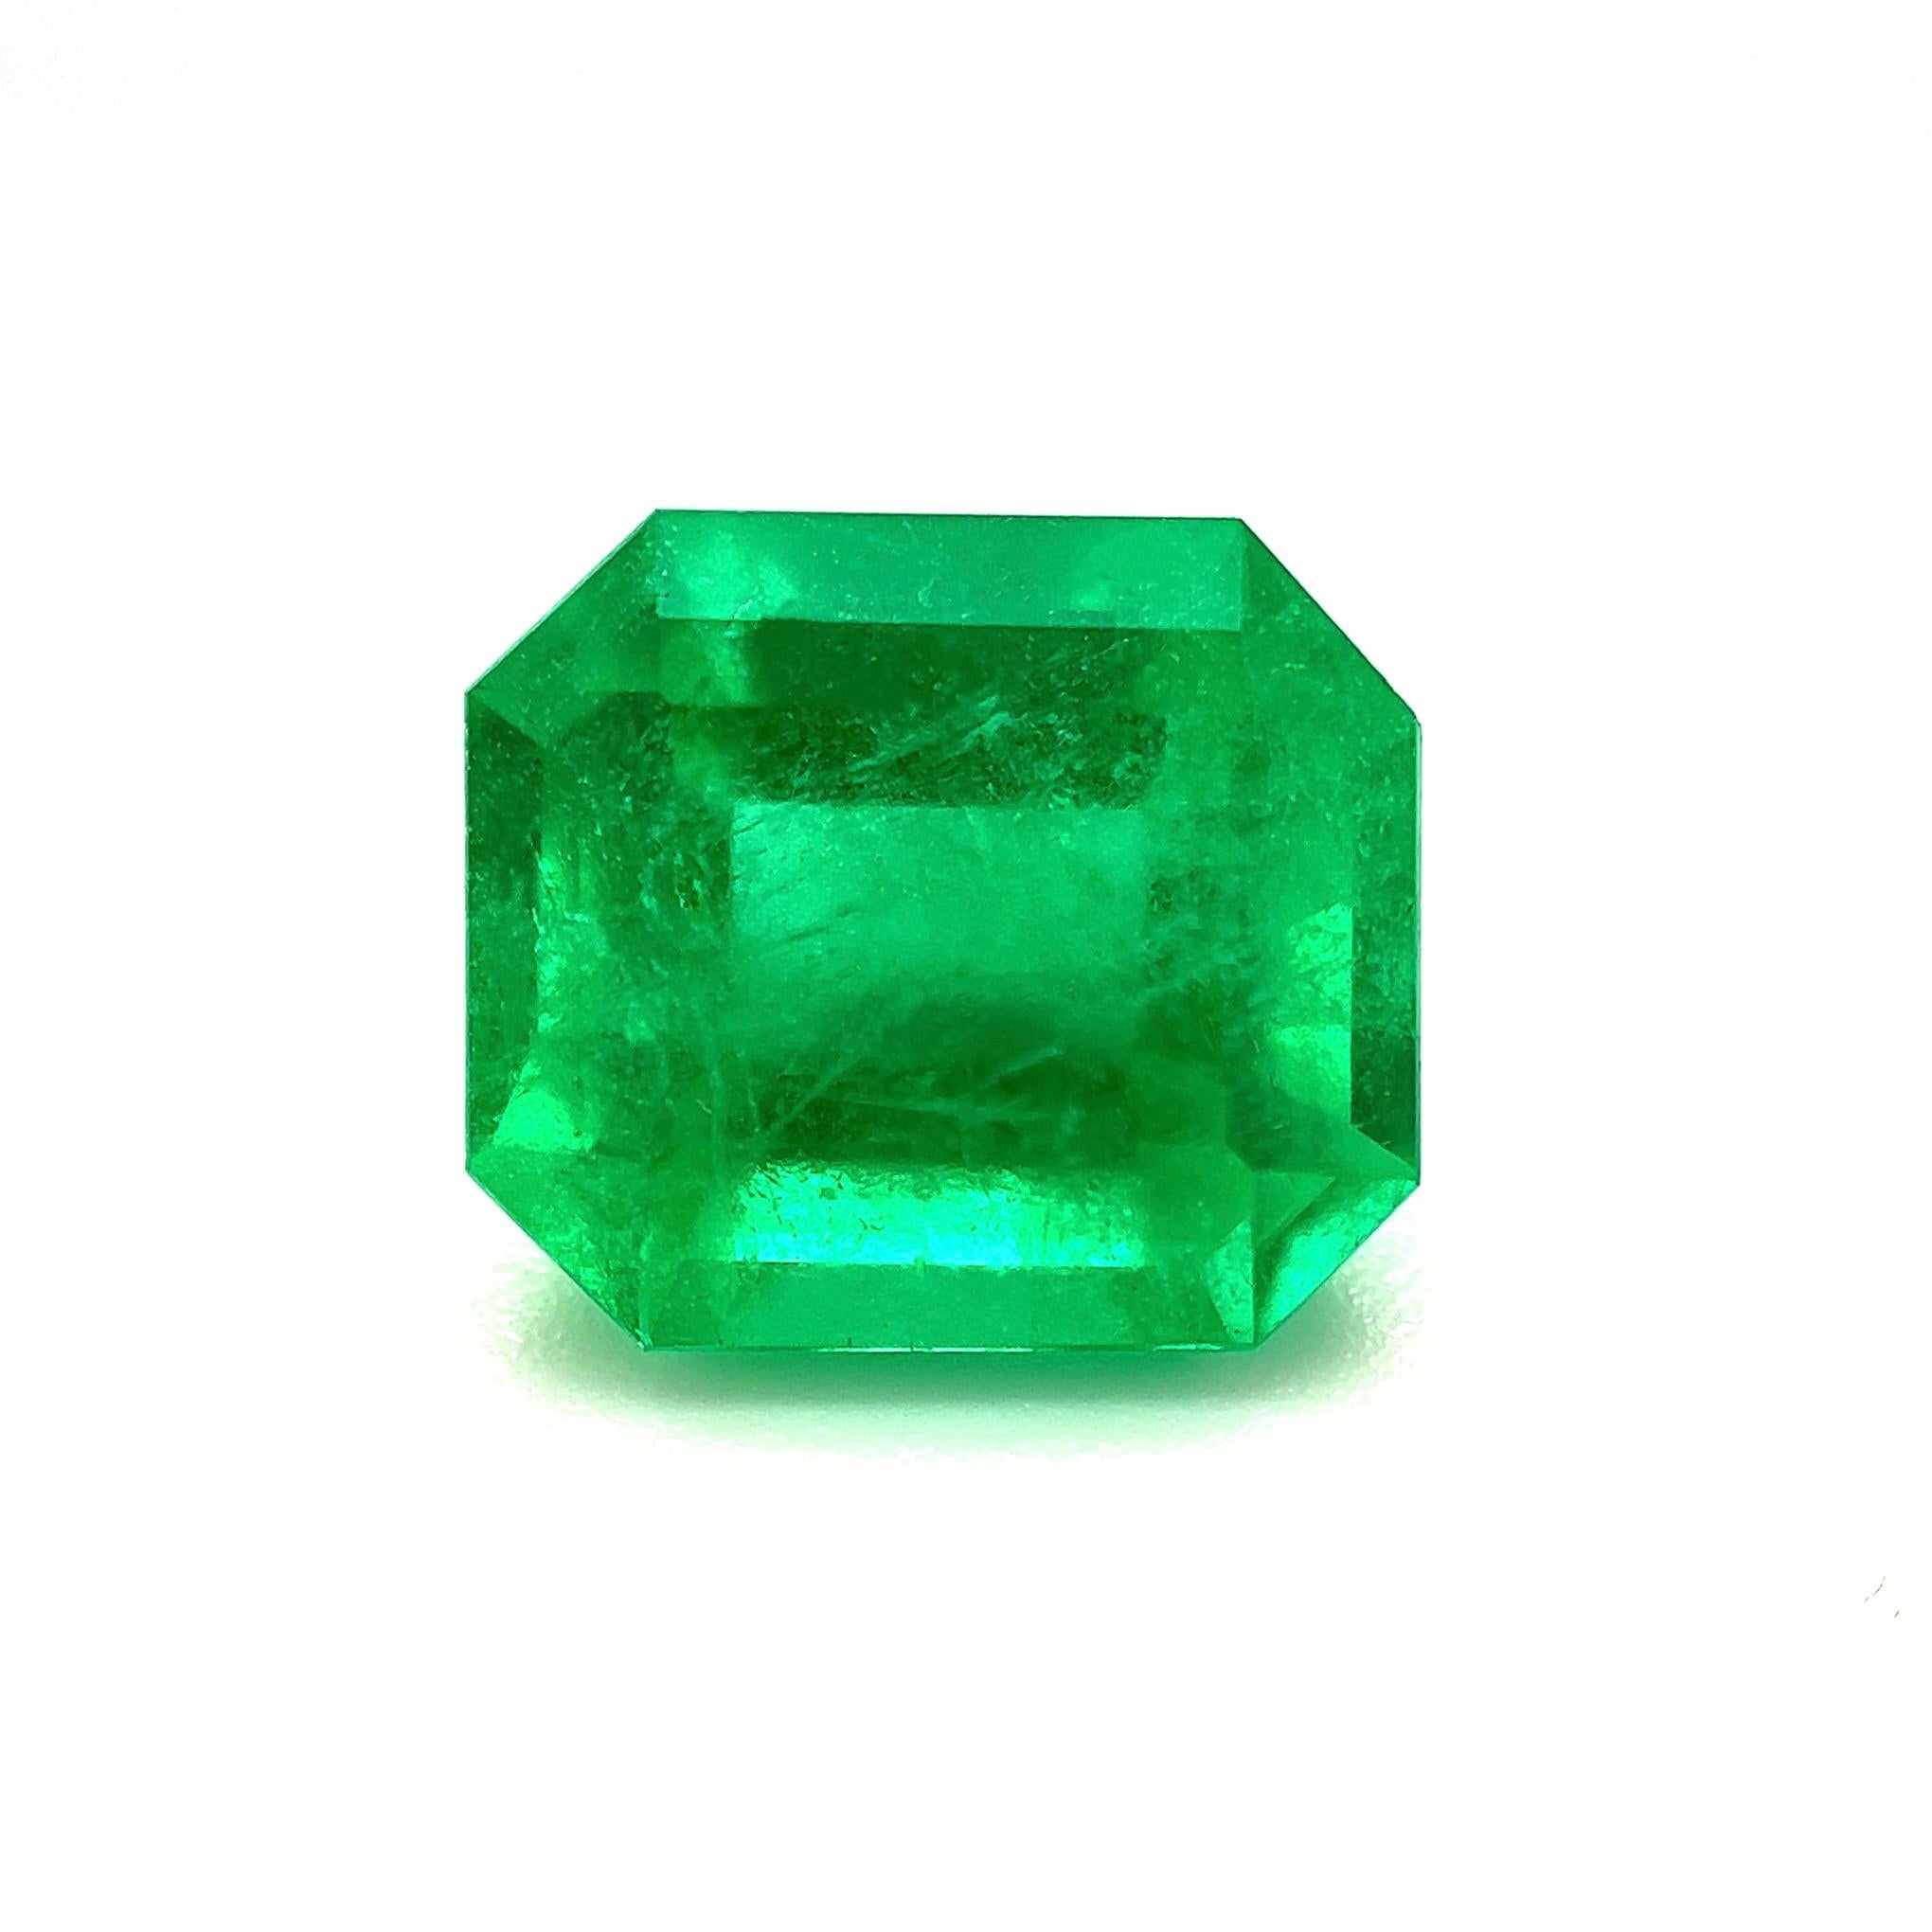 Rare GIA Certified Large Colombian Emerald Gemstone.

3.15 Carat emerald with a bright green colour and good clarity. Clean stone with only some natural inclusions visible when looking closely. Emeralds are typically highly included stones and so